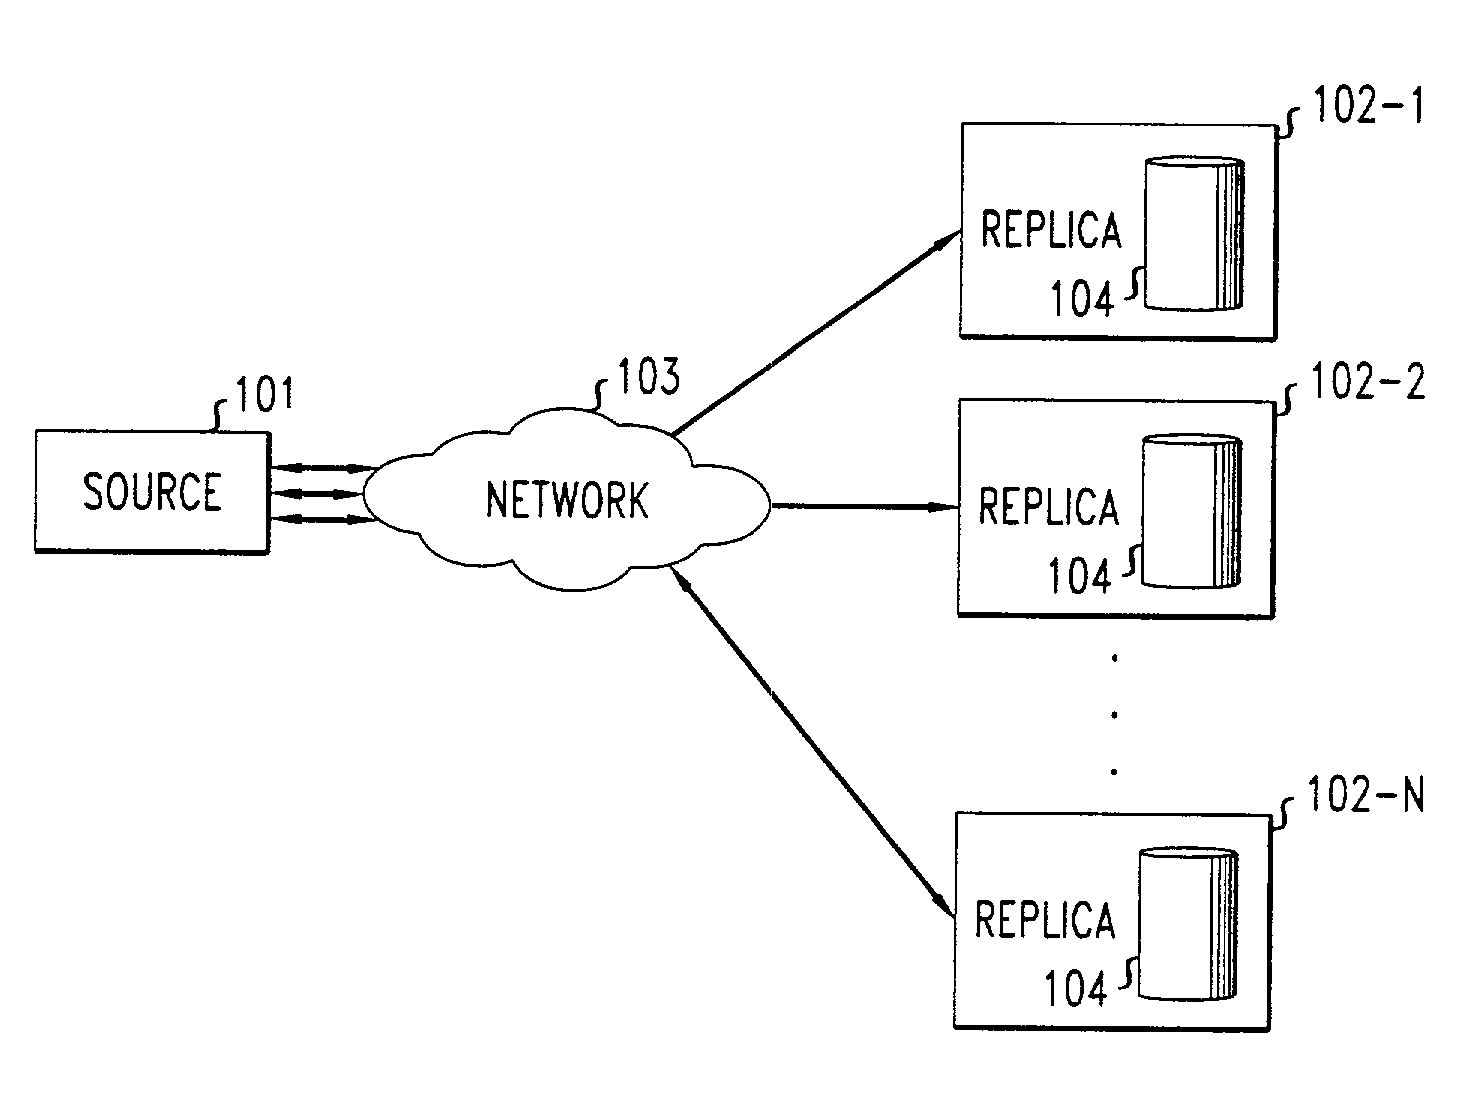 Method for maintaining consistency and performing recovery in a replicated data storage system